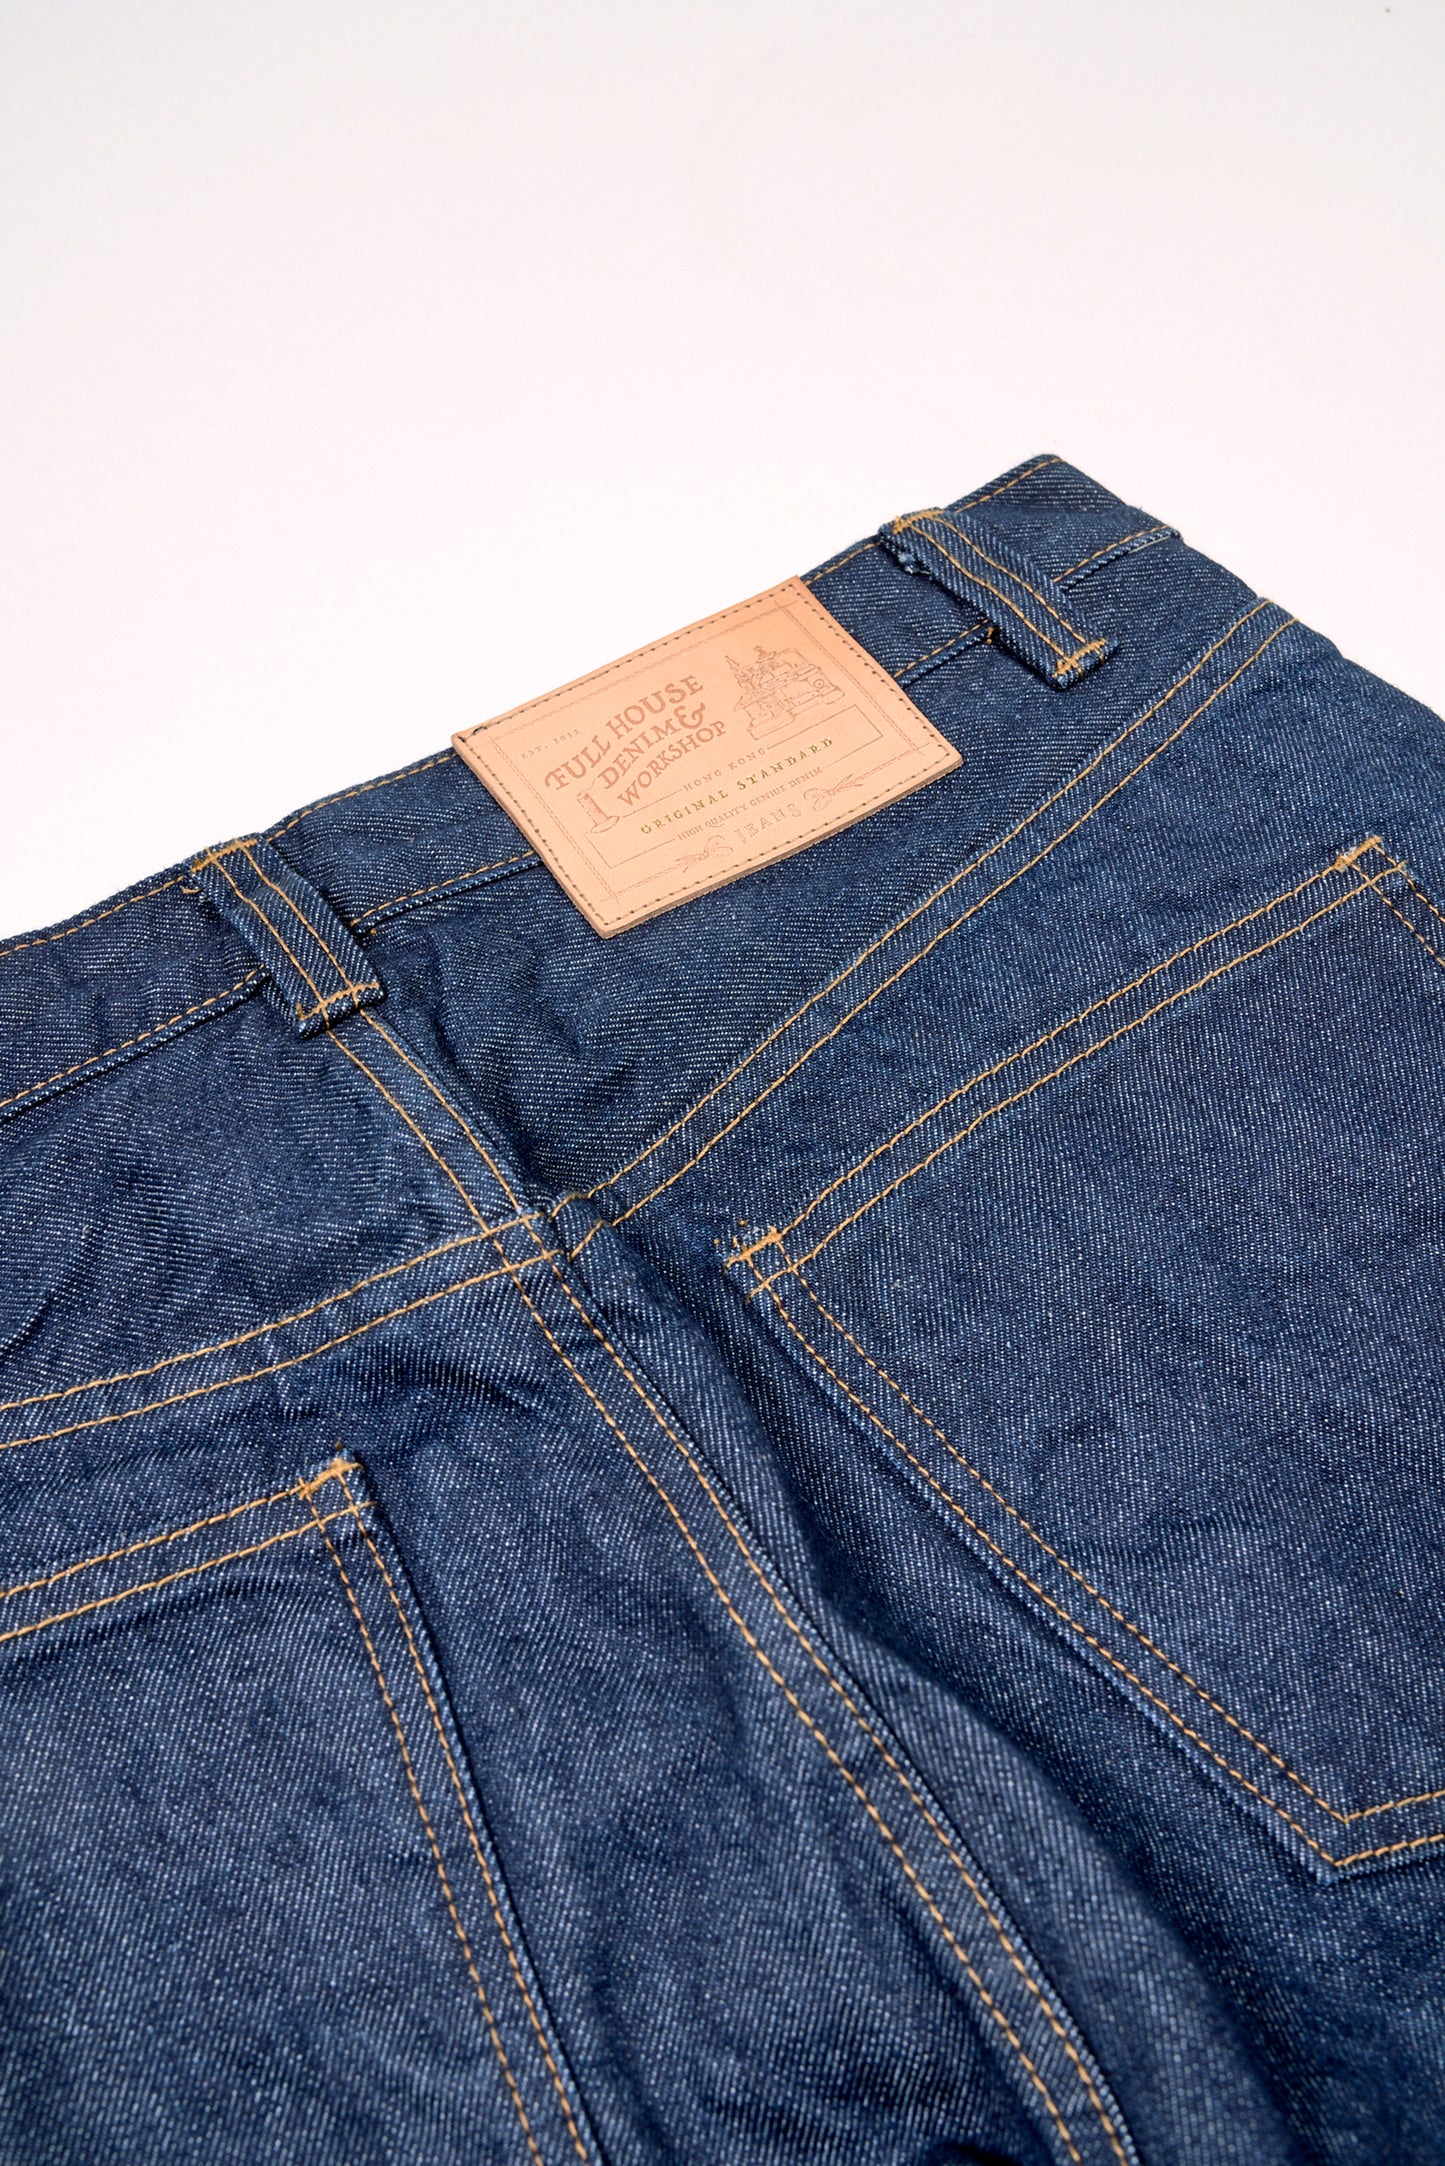 13oz. Selvage 1940s High Waist Unwashed Jeans